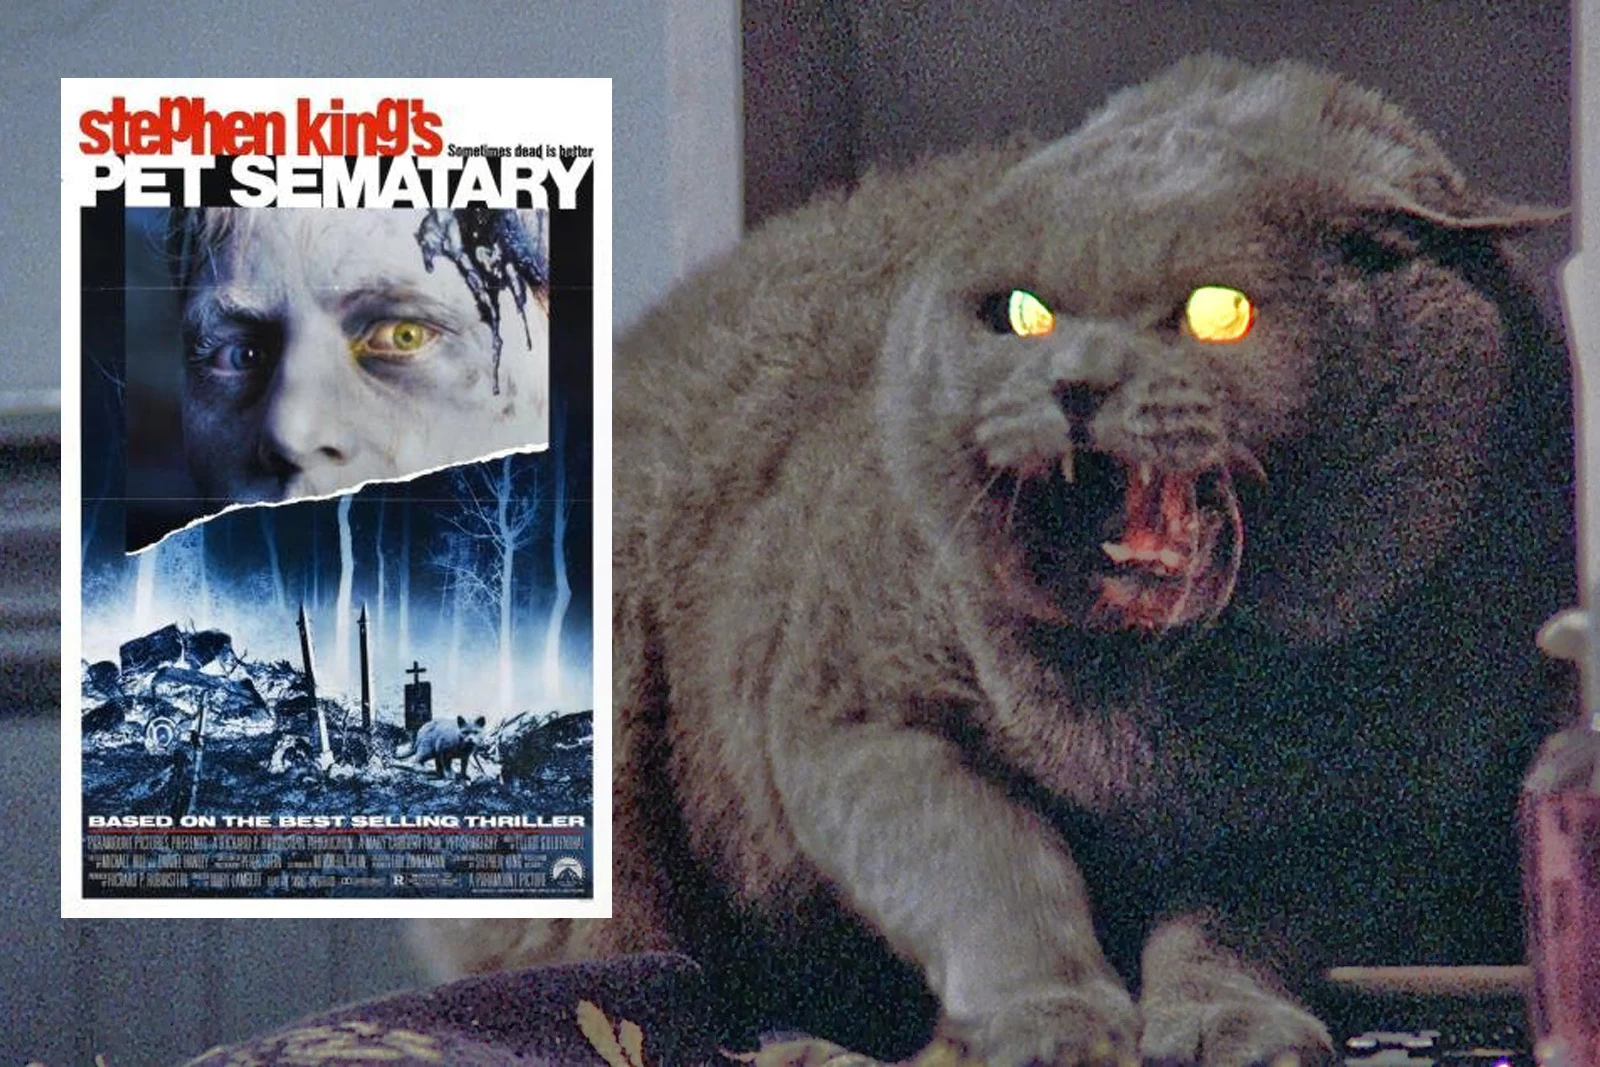 How Stephen King Scared Himself With Pet Sematary